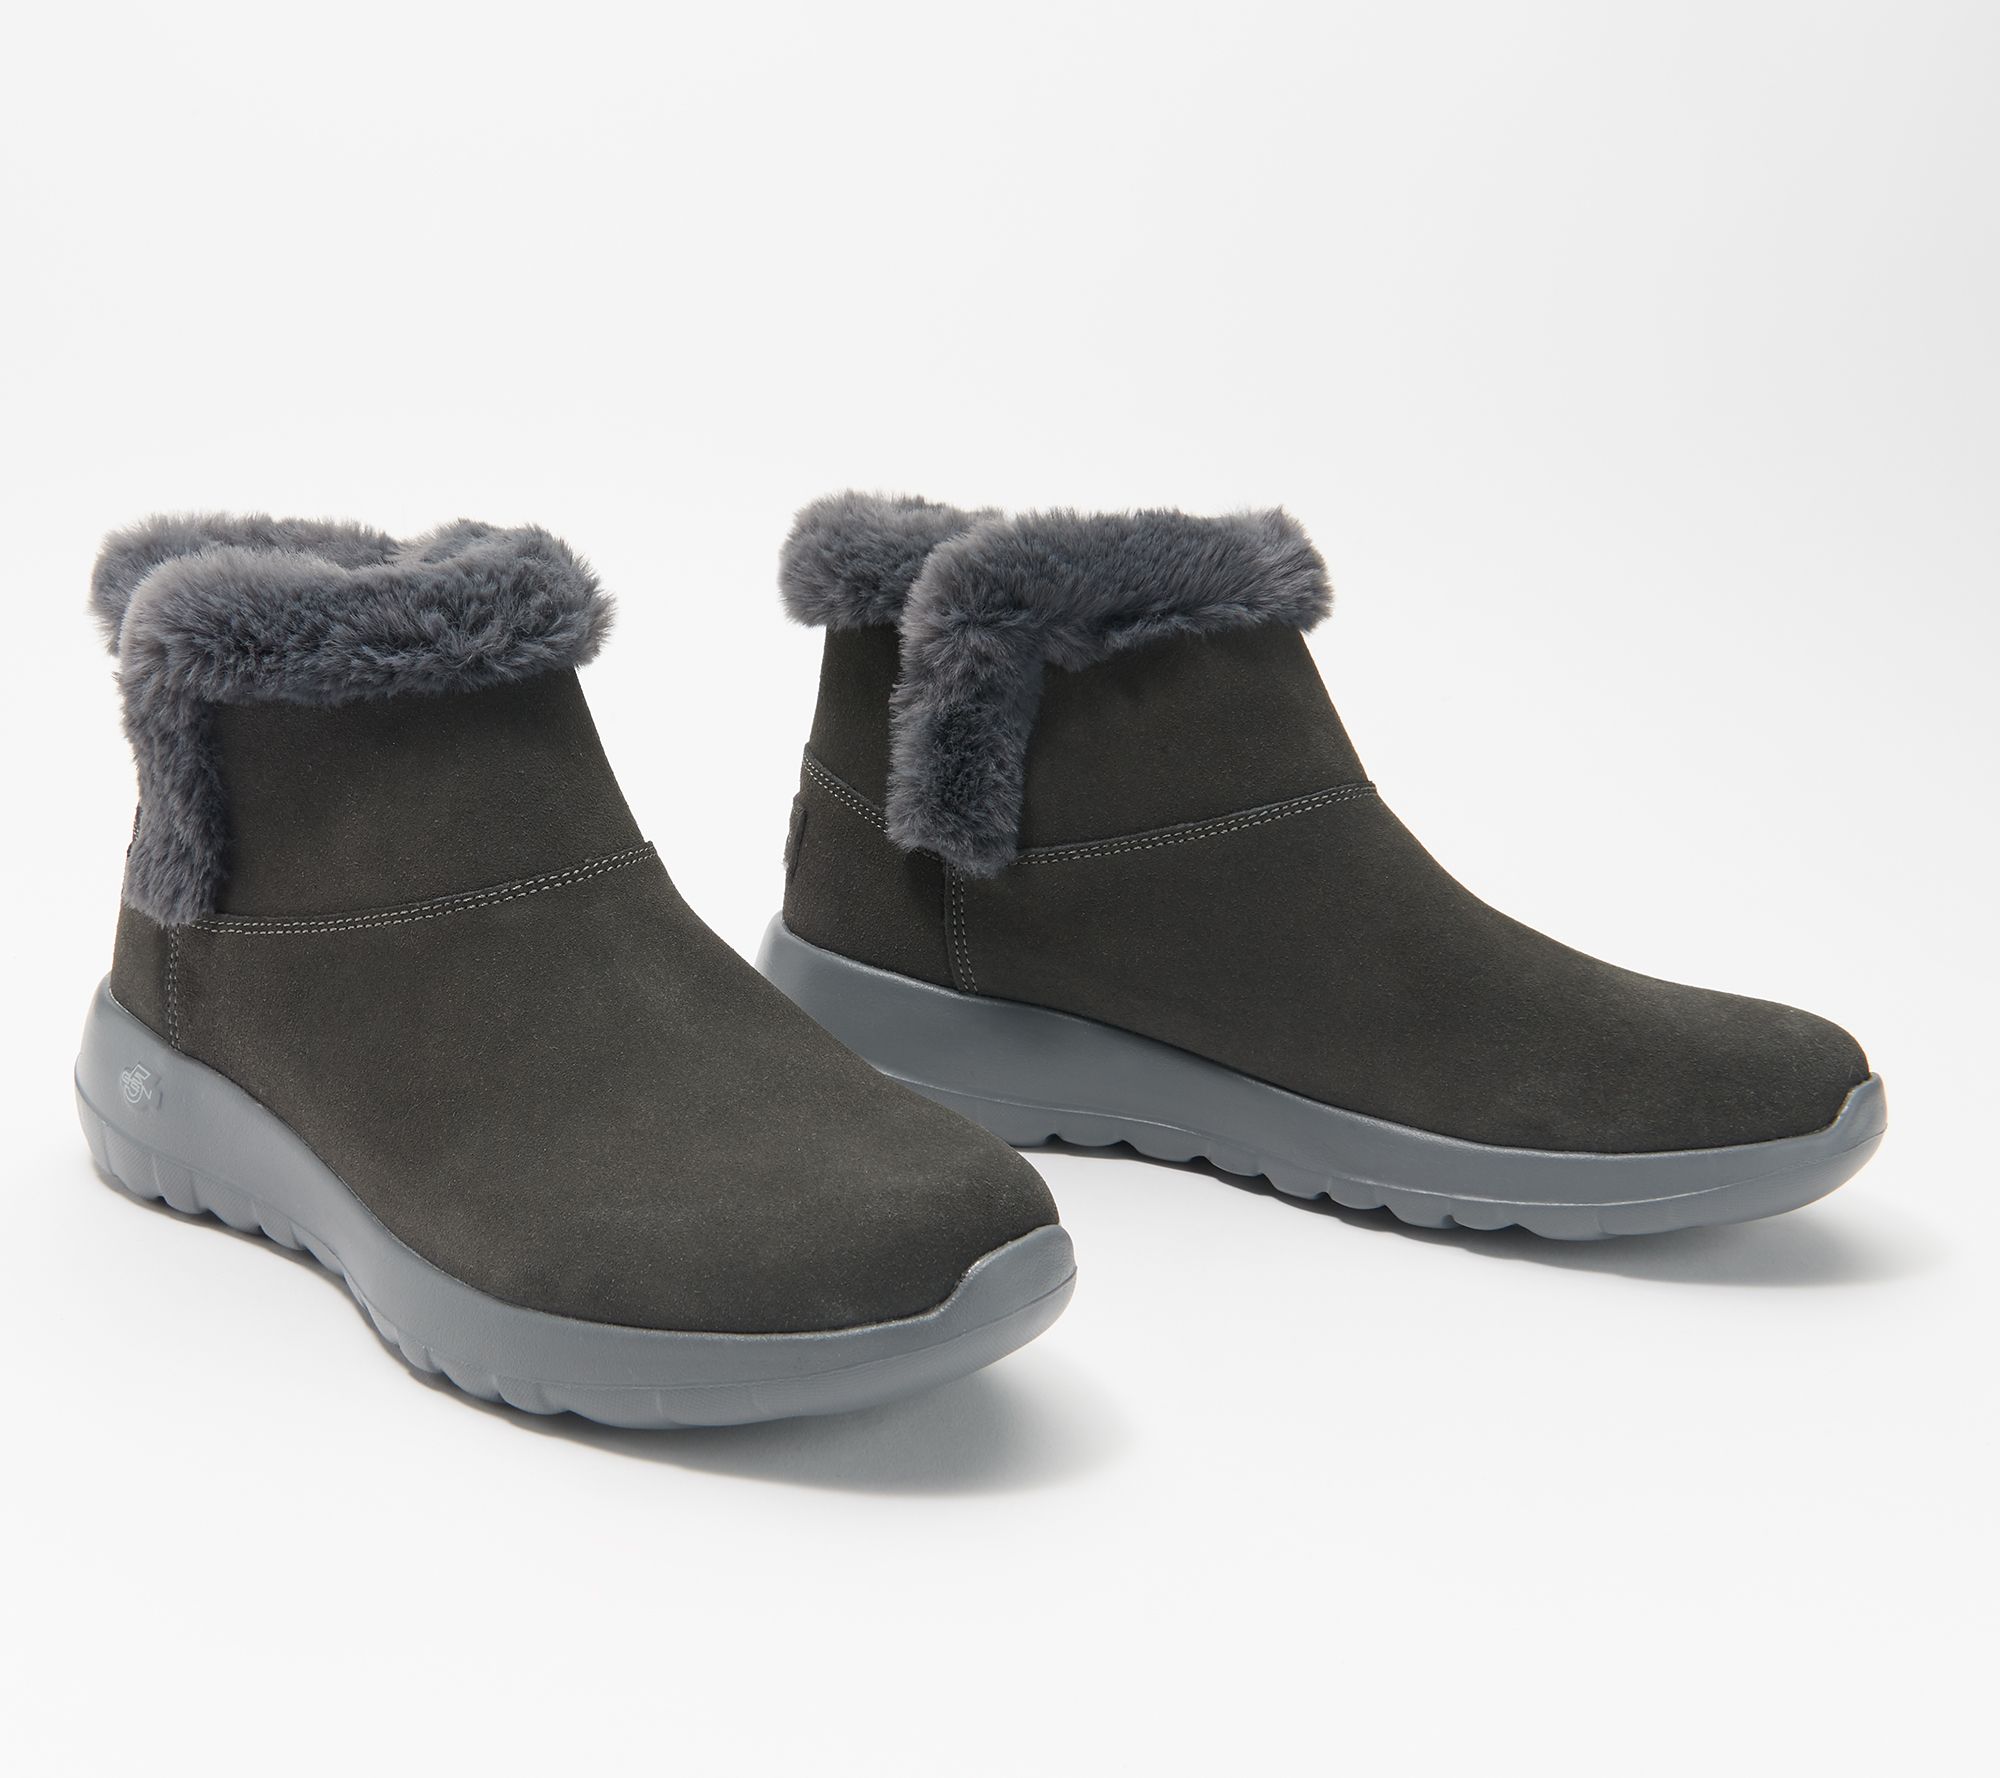 skechers on the go joy ankle boots